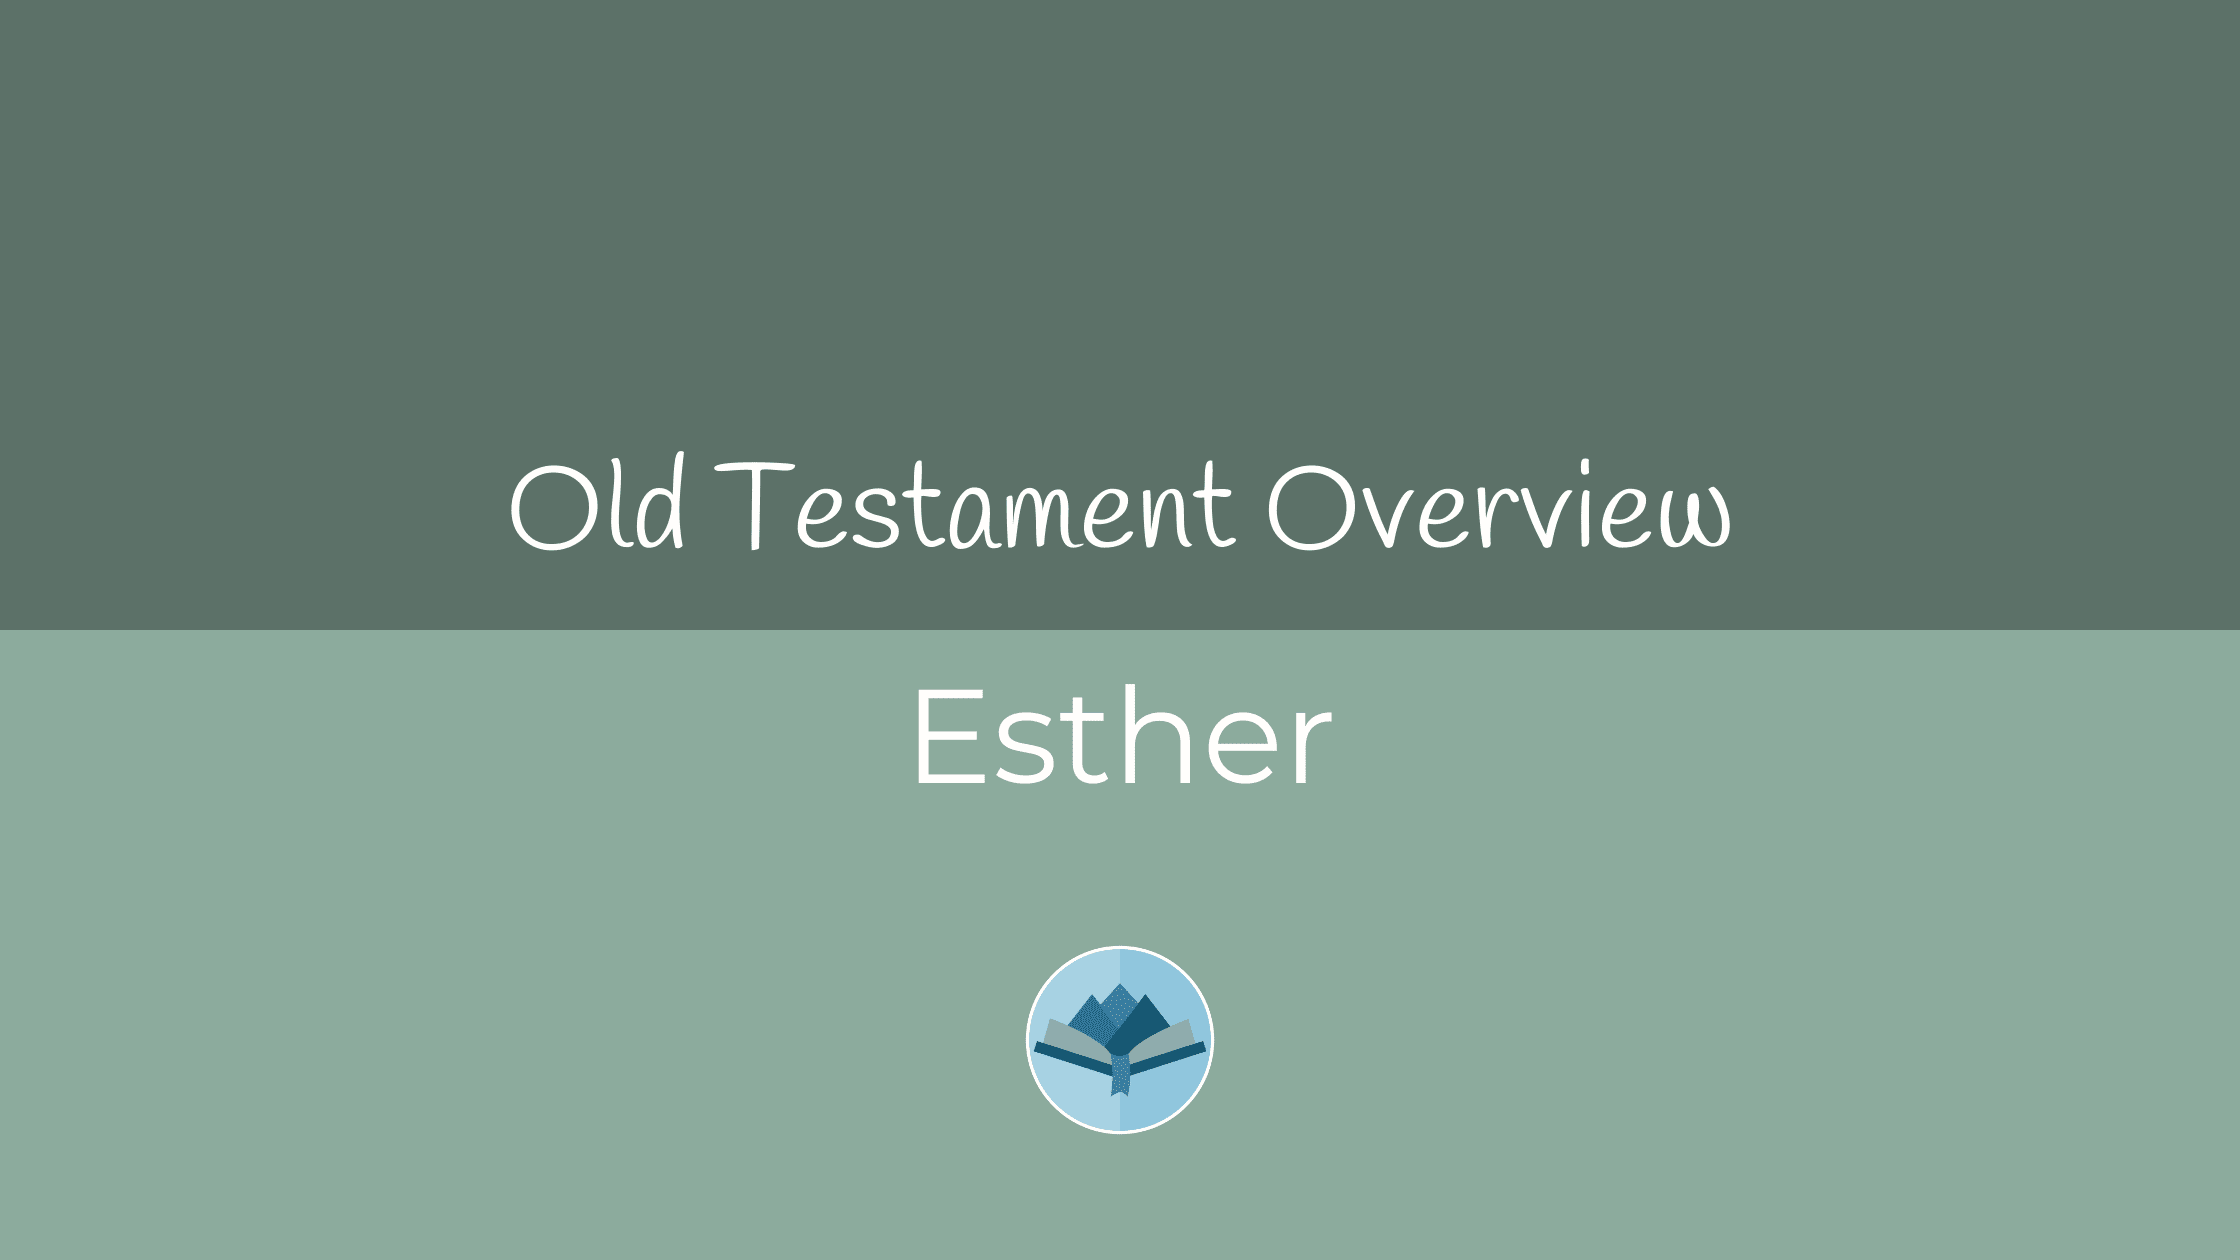 Esther Overview